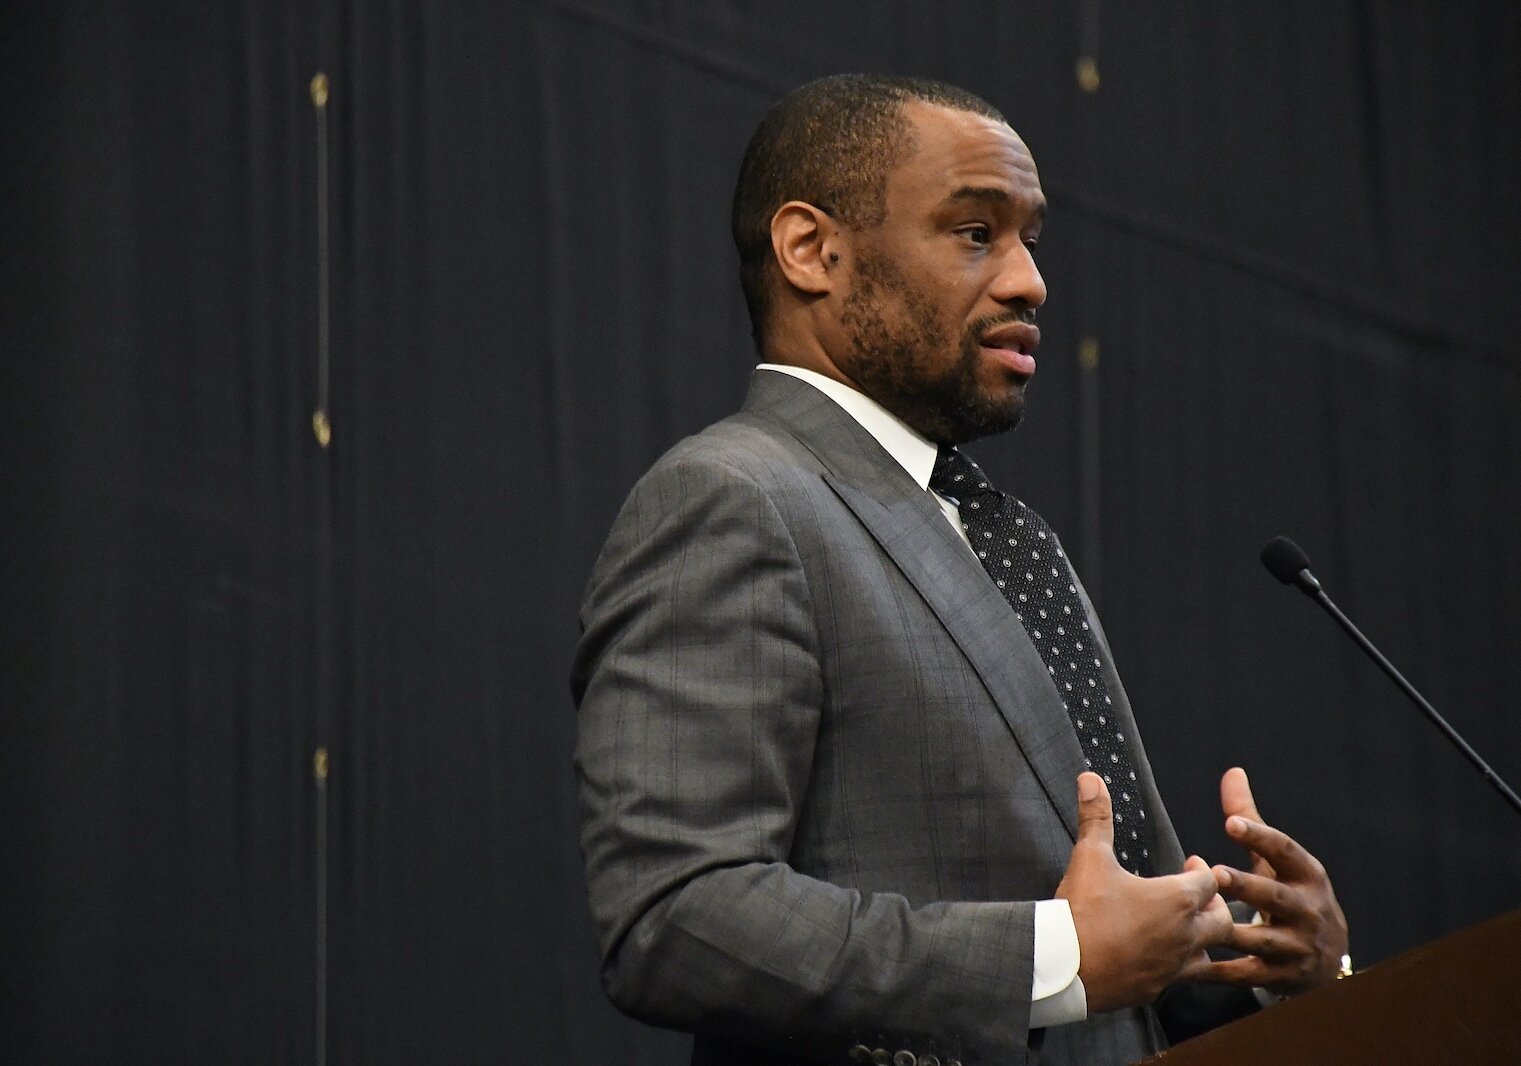 Dr. Marc Lamont Hill gives the keynote address during Monday’s “We, Us, Our: 55 Shades of Black” commemoration of Martin Luther King, Jr’s birthday sponsored by the Southwestern Michigan Urban League at Kellogg Arena.